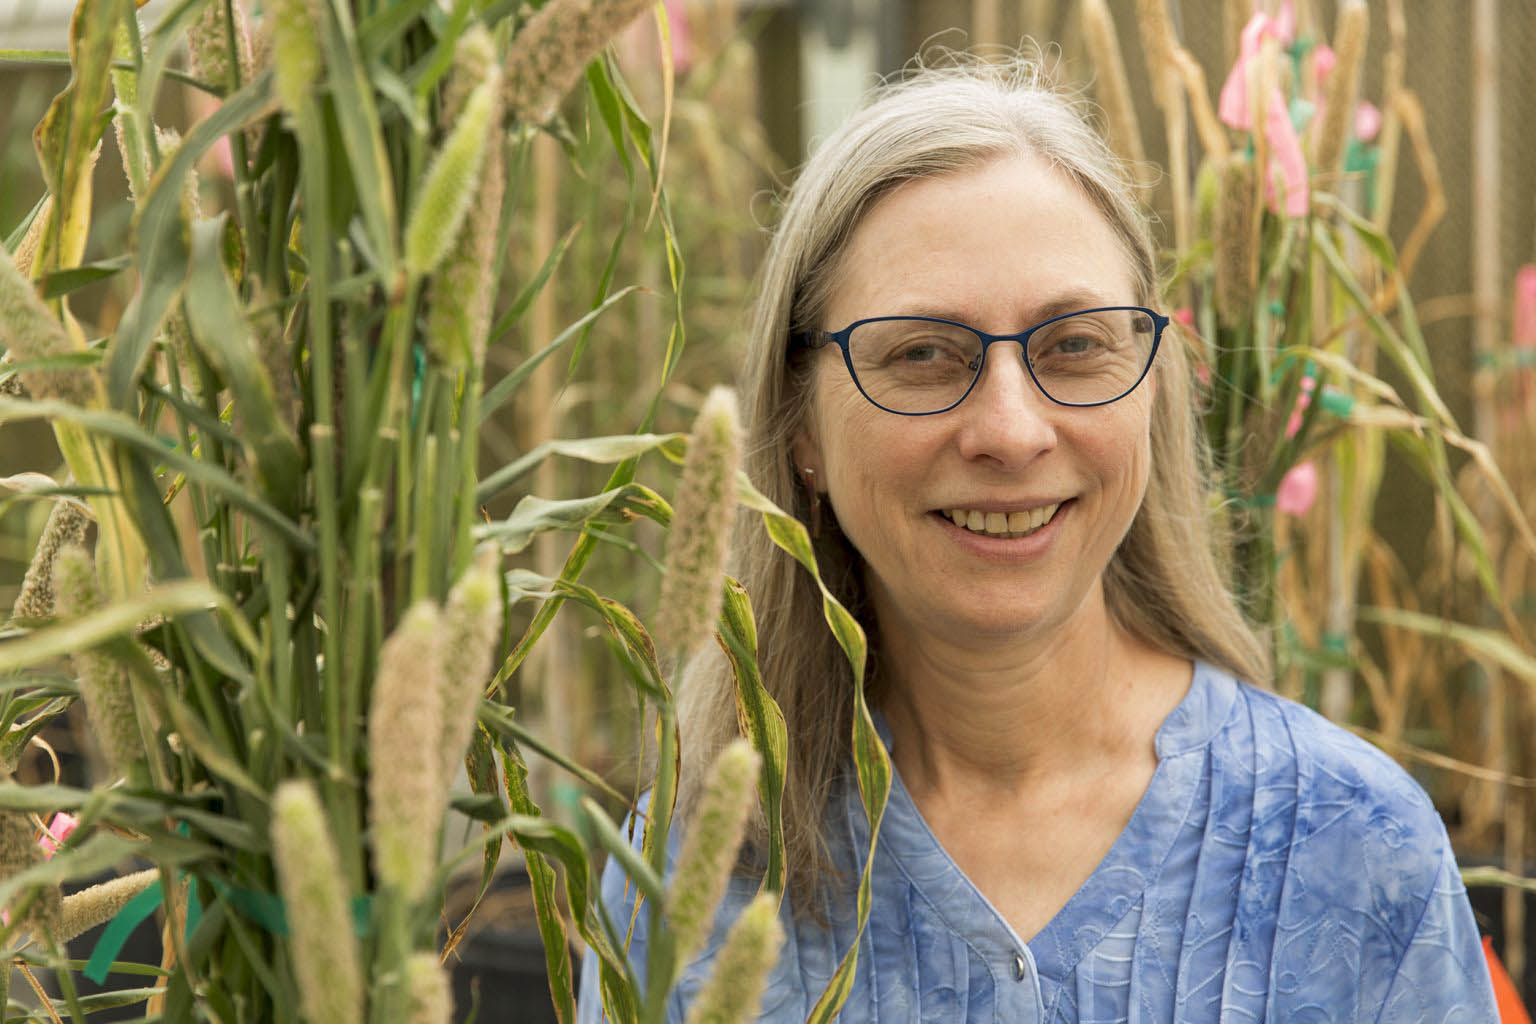 Peggy Ozias-Akins, a global leader in the application of biotechnology for crop improvement, has been named UGA’s recipient of the SEC Faculty Achievement Award. She is pictured in her greenhouse surrounded by Pennisetum (pearl millet) hybrid plants.